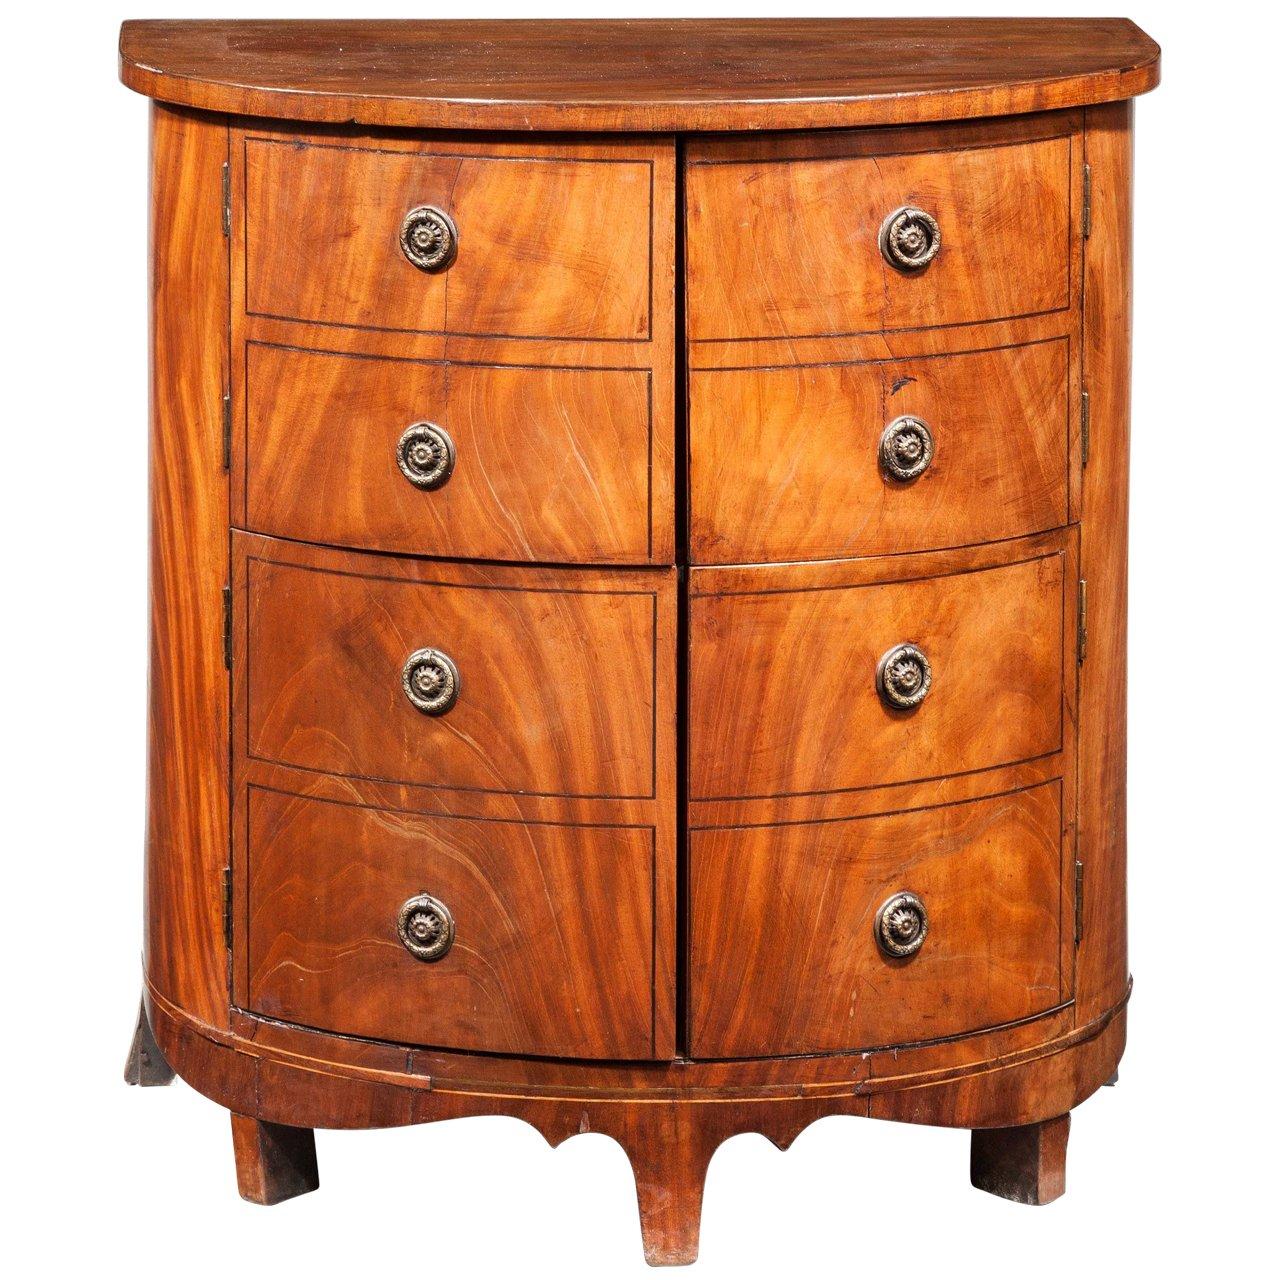 Early 19th Century Bow-Front Commode